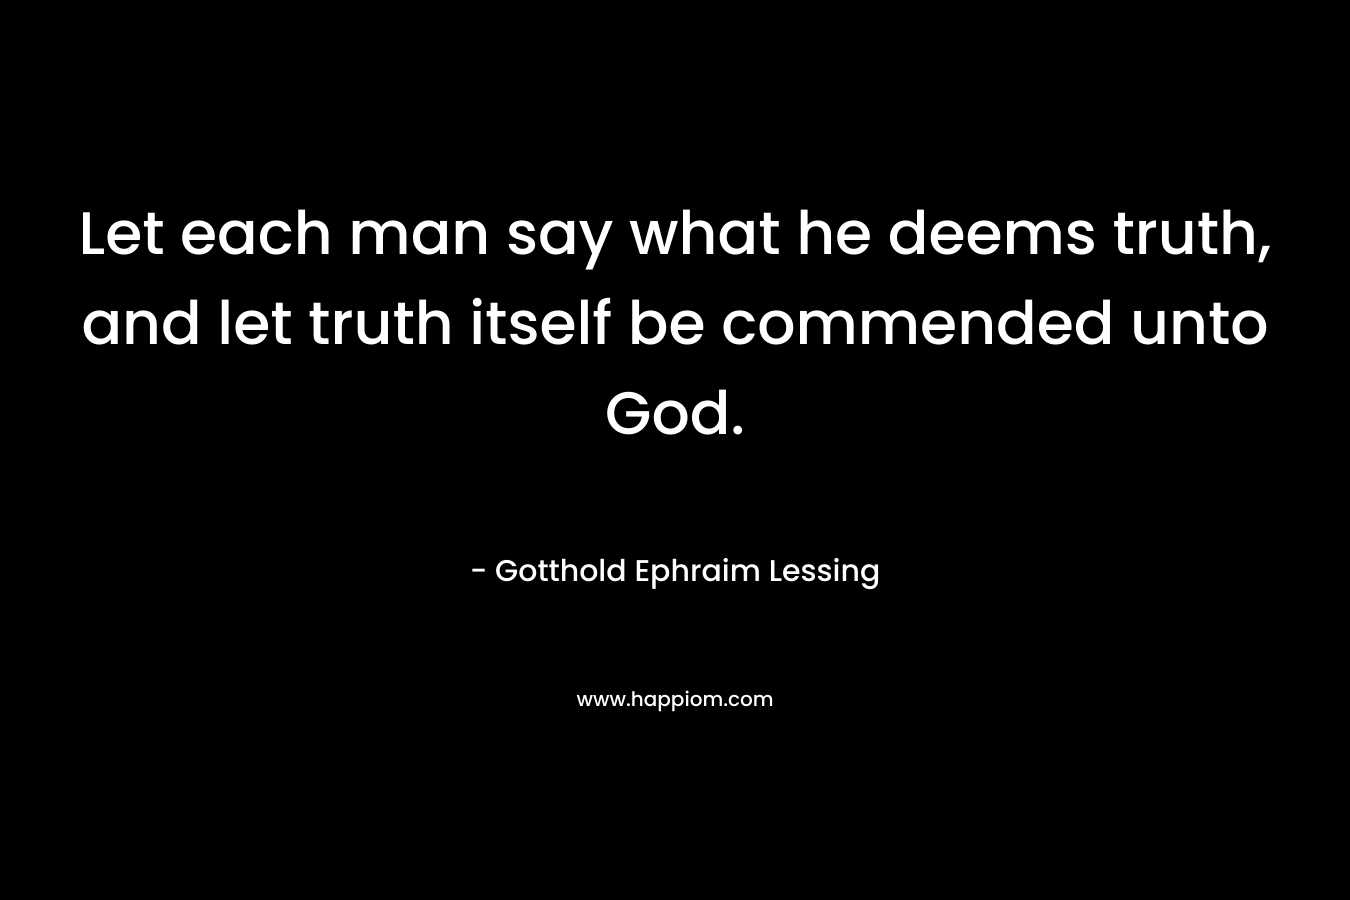 Let each man say what he deems truth, and let truth itself be commended unto God. – Gotthold Ephraim Lessing